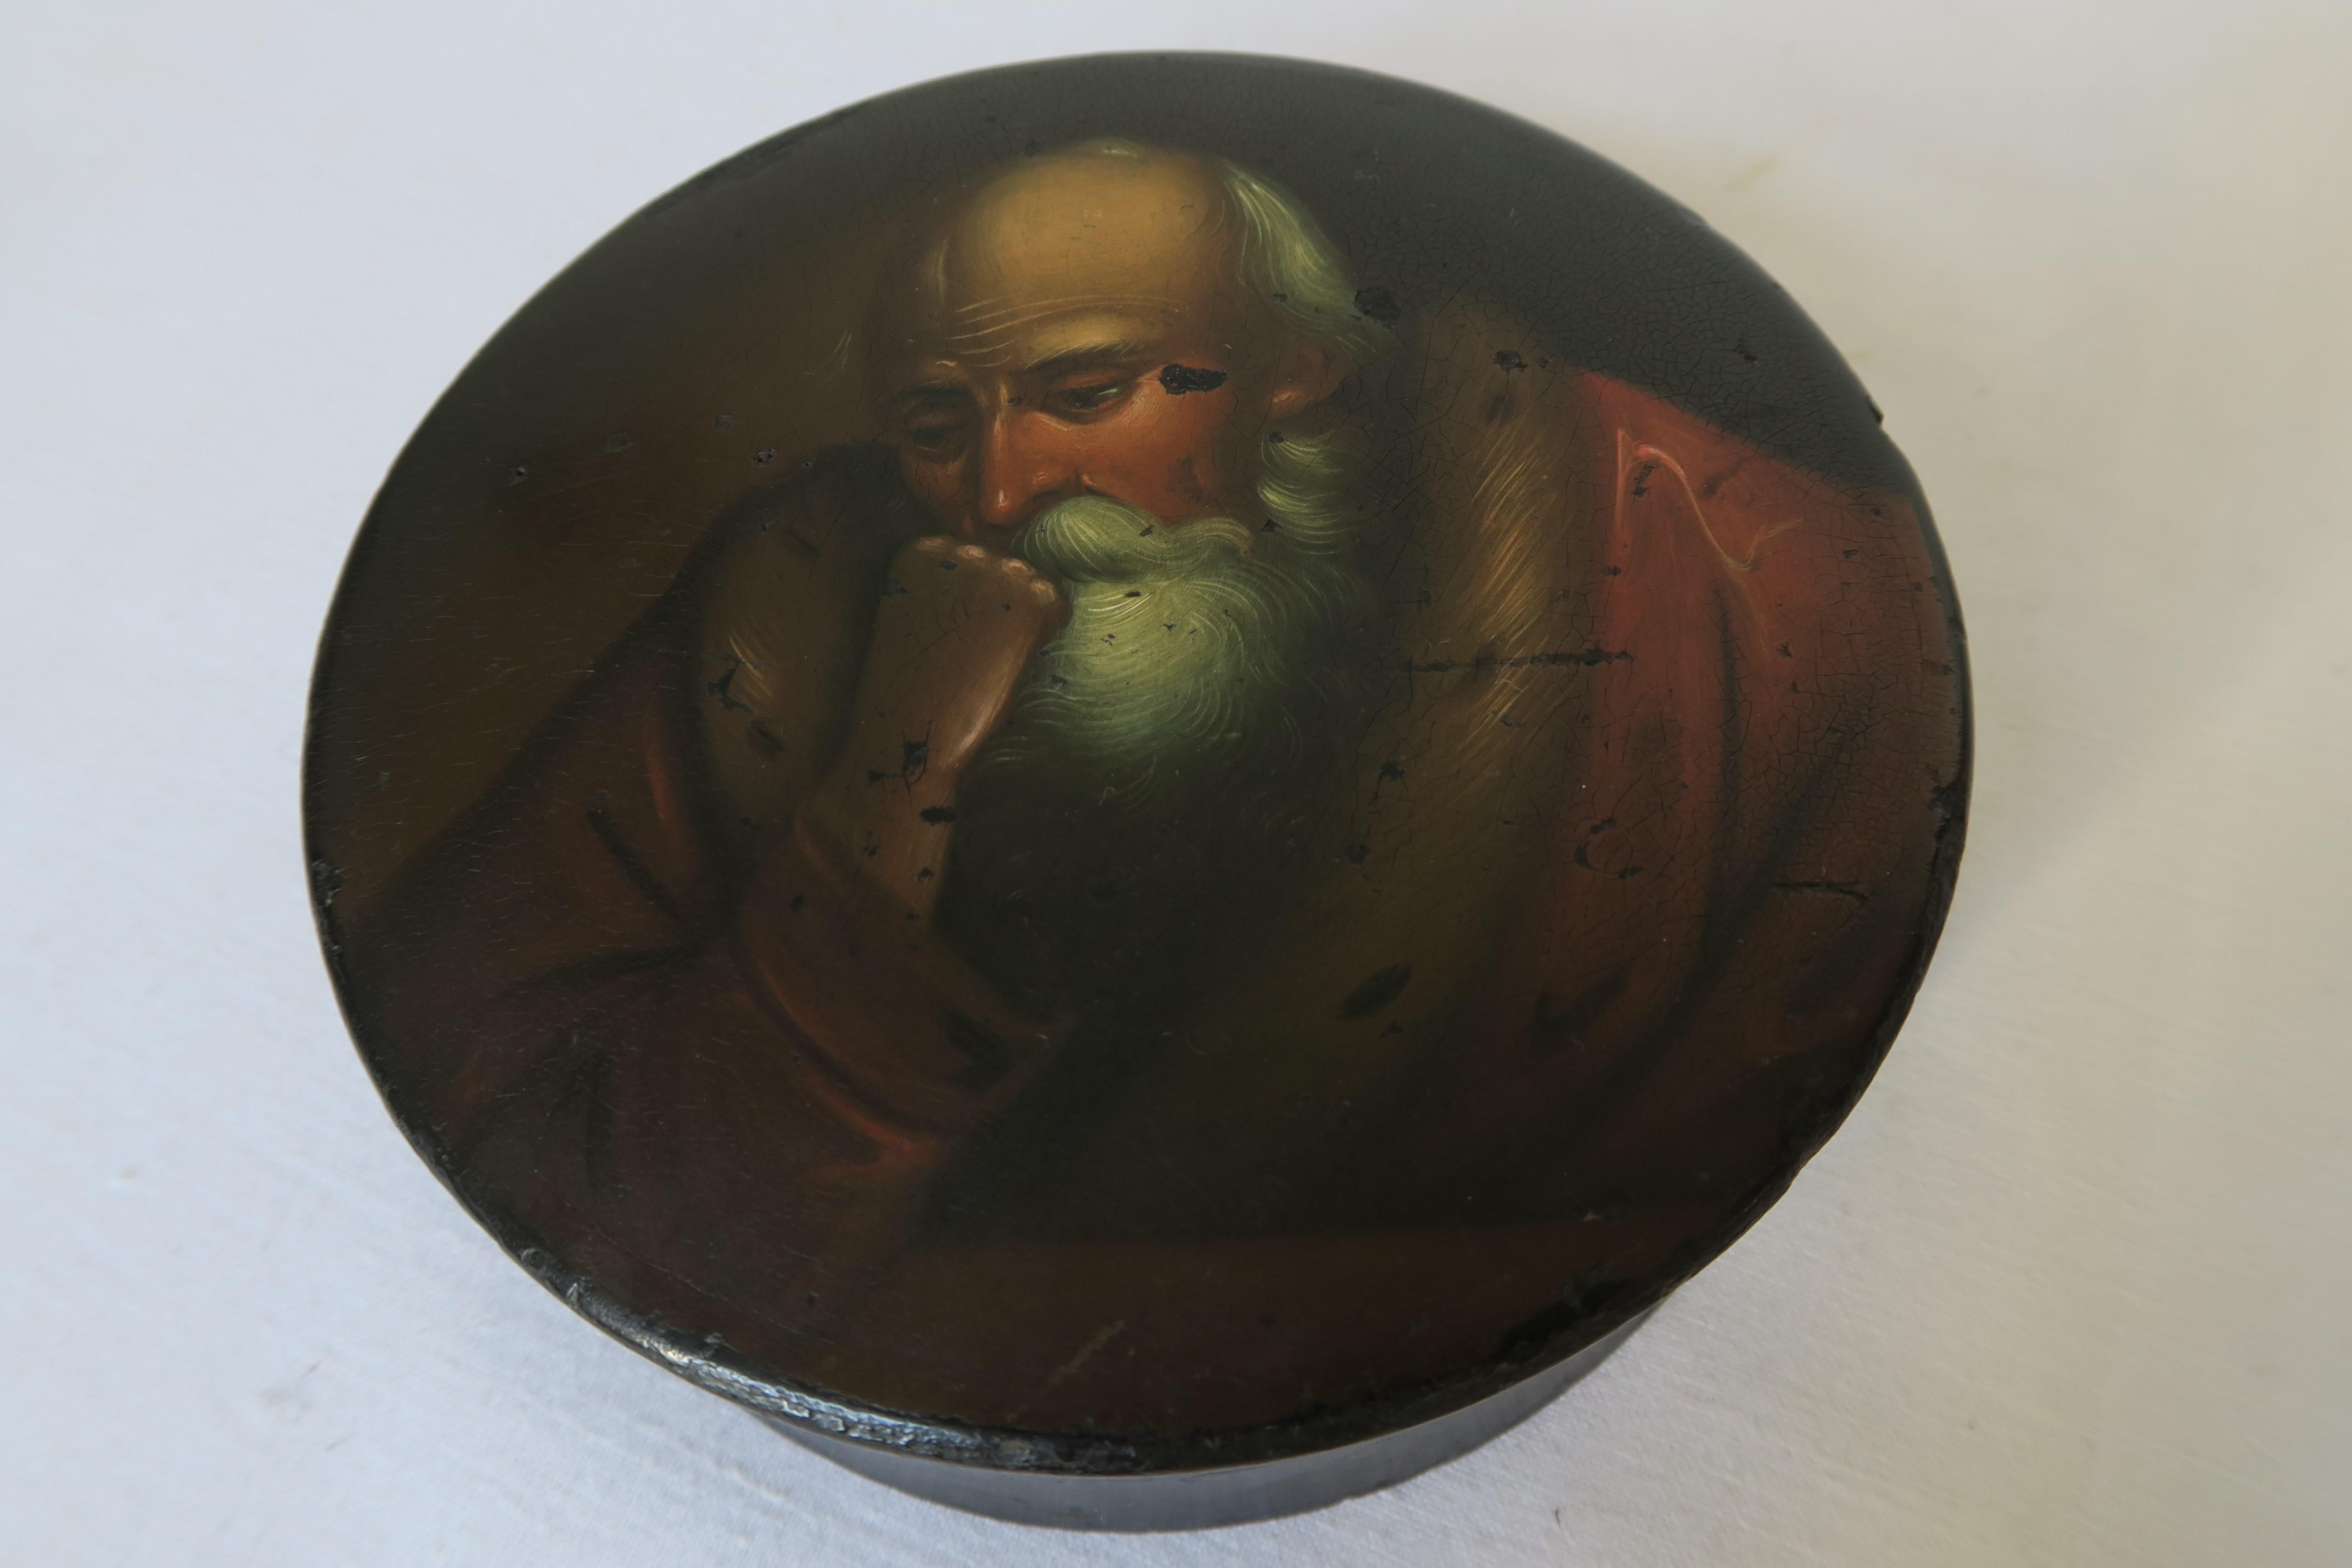 In this ad you get the chance to buy a beautiful hand-painted Russian lacquer box from the 1800s. It is cylindrical in shape, slightly curving inwards where box and lid meet. Hand-painted on the lid is the portrait of a philosopher who looks deeply